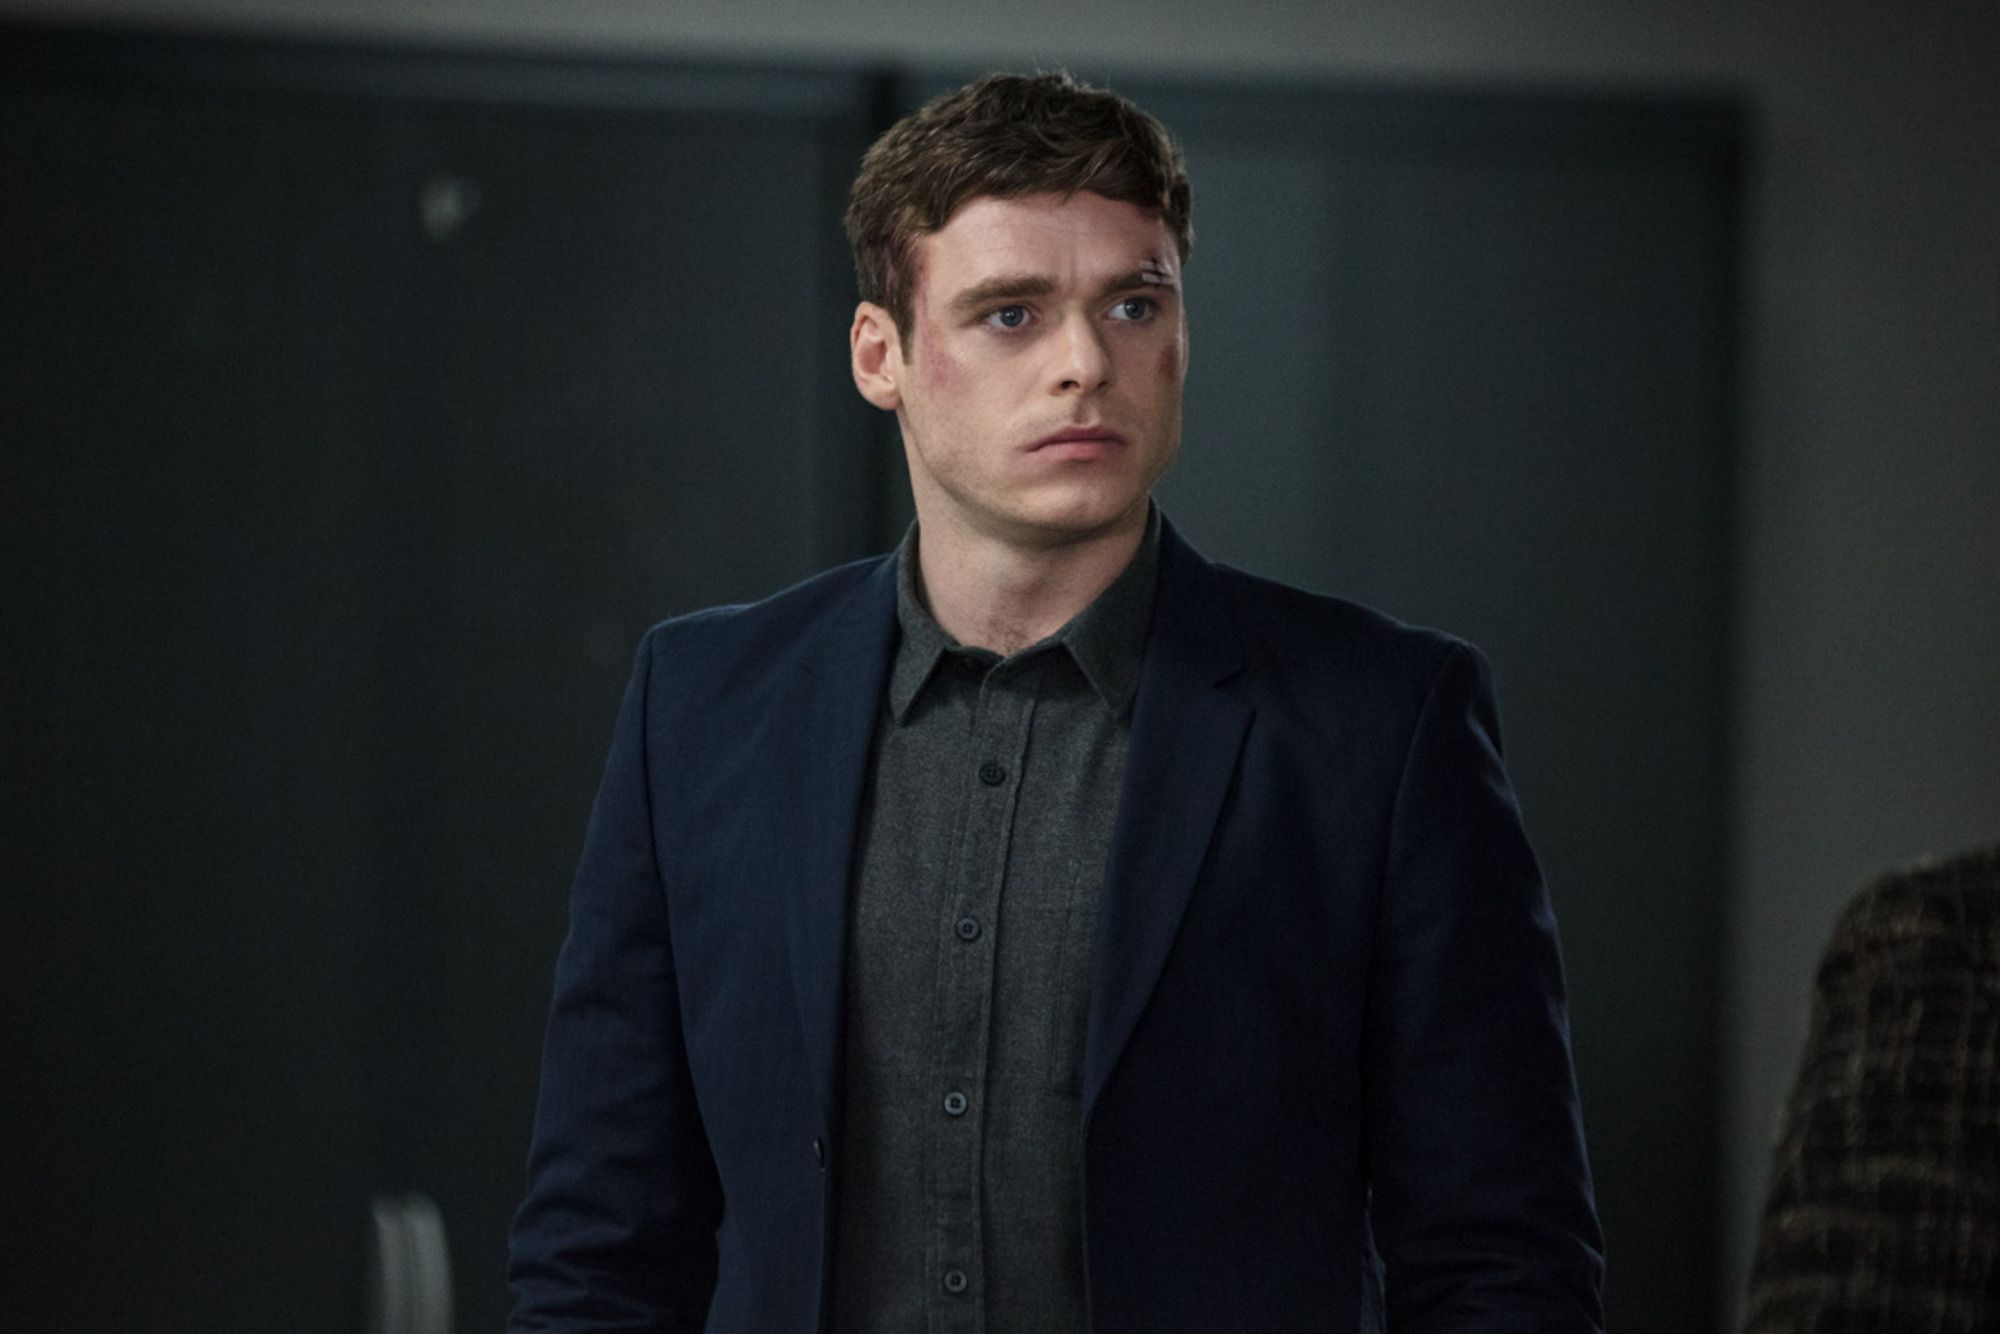 Rumorville: 'Bodyguard' Creator Is in Talks With BBC for a Season 2 + More  Projects to Watch